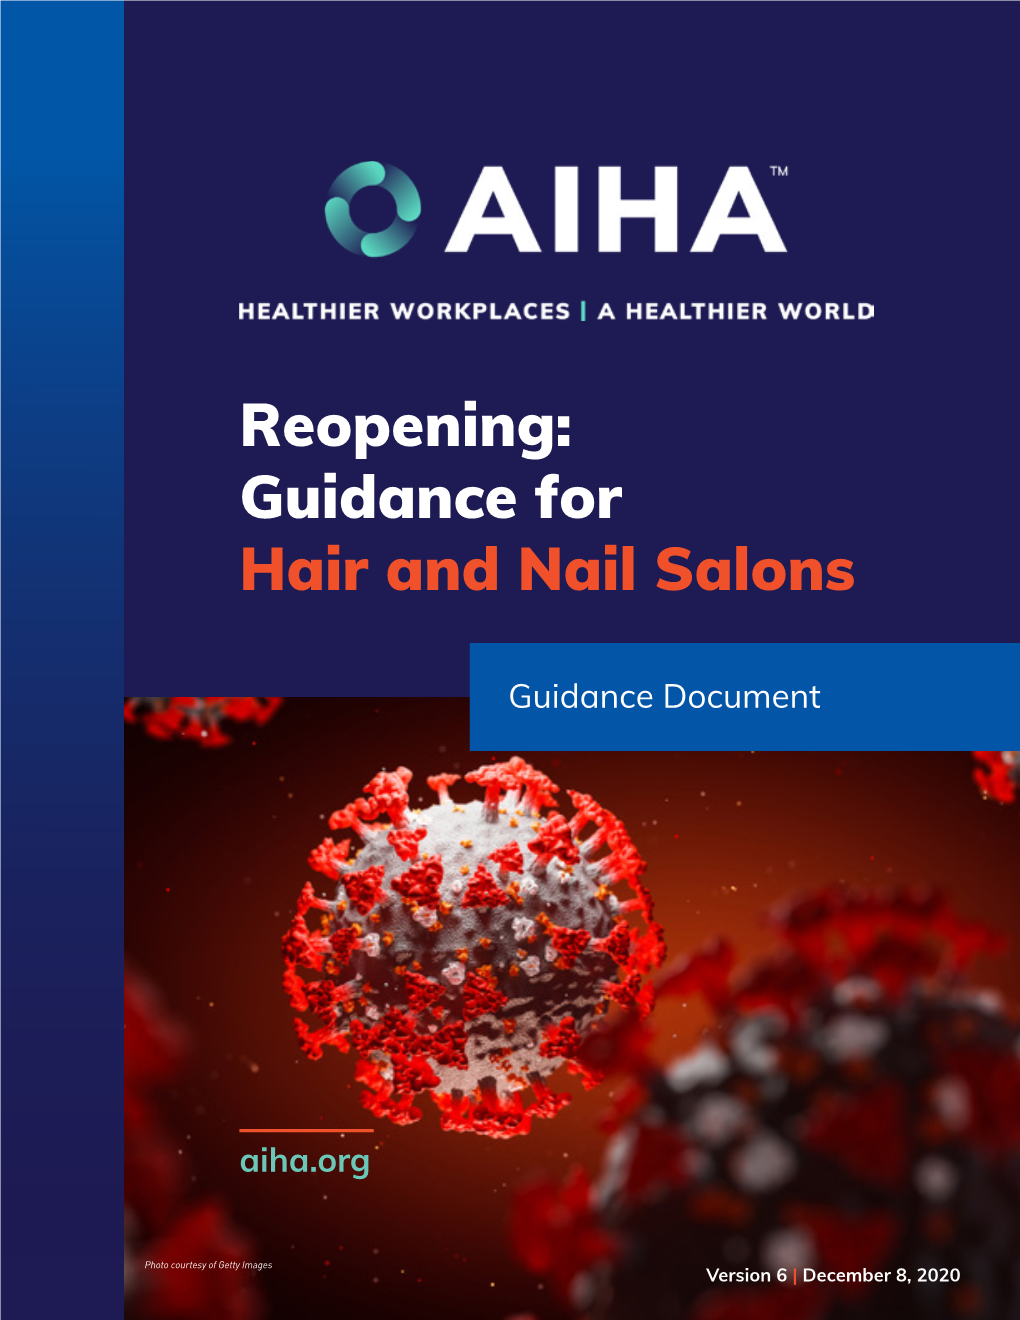 AIHA Reopening: Guidance for Hair and Nail Salons